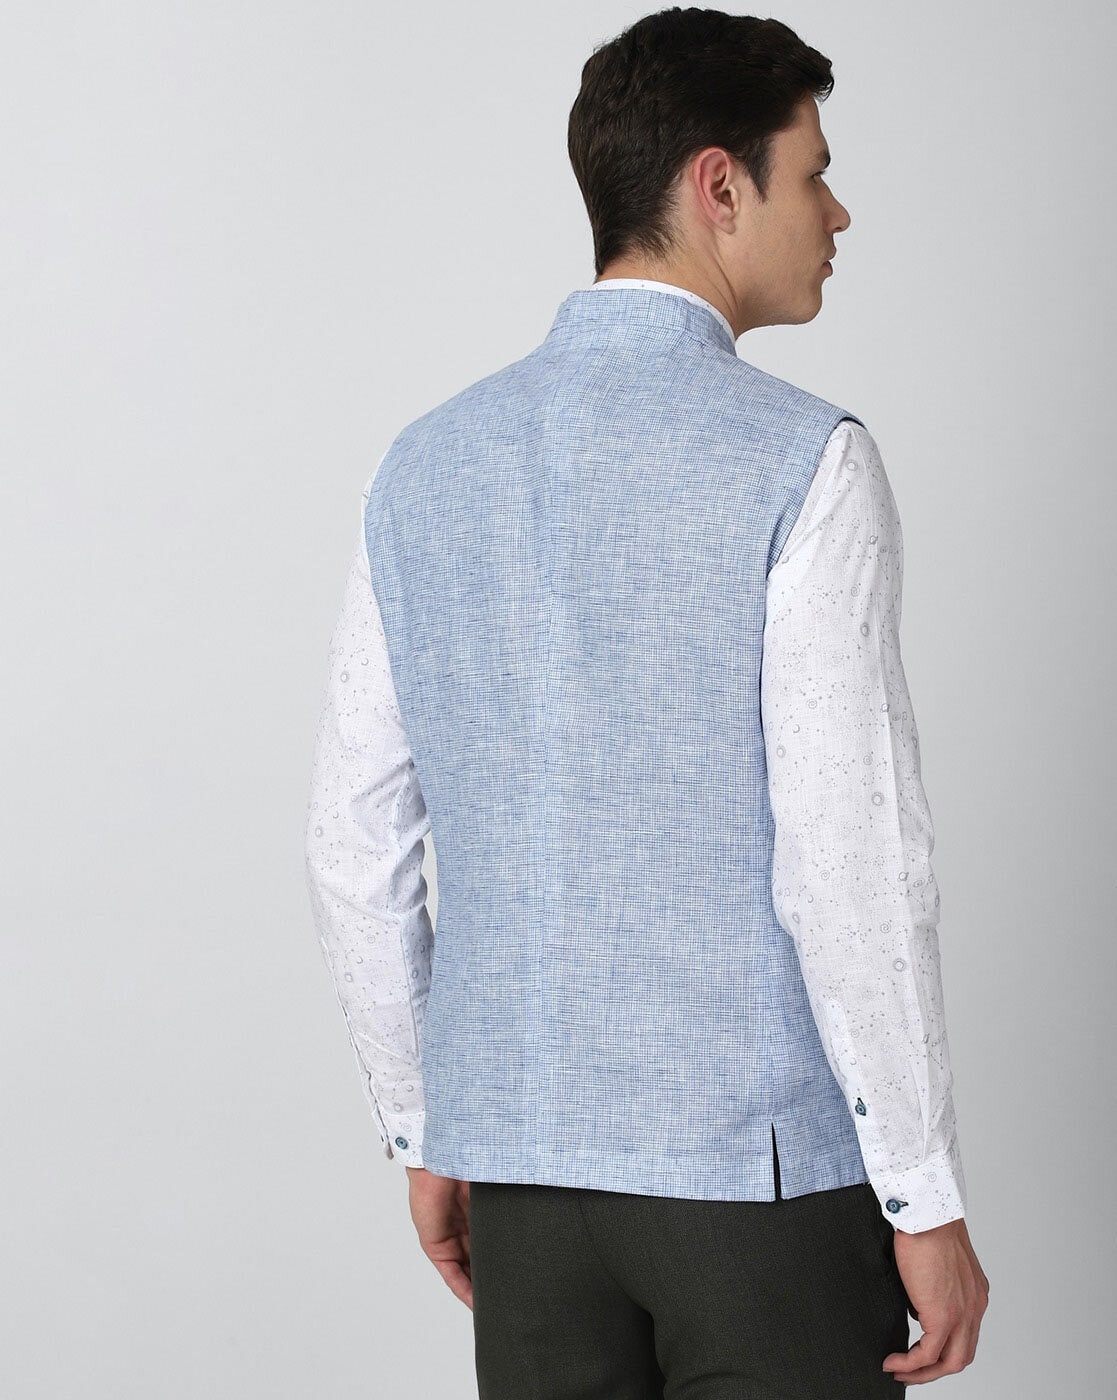 Reversible sleeveless quilted jacket in blue and white pochampally cotton